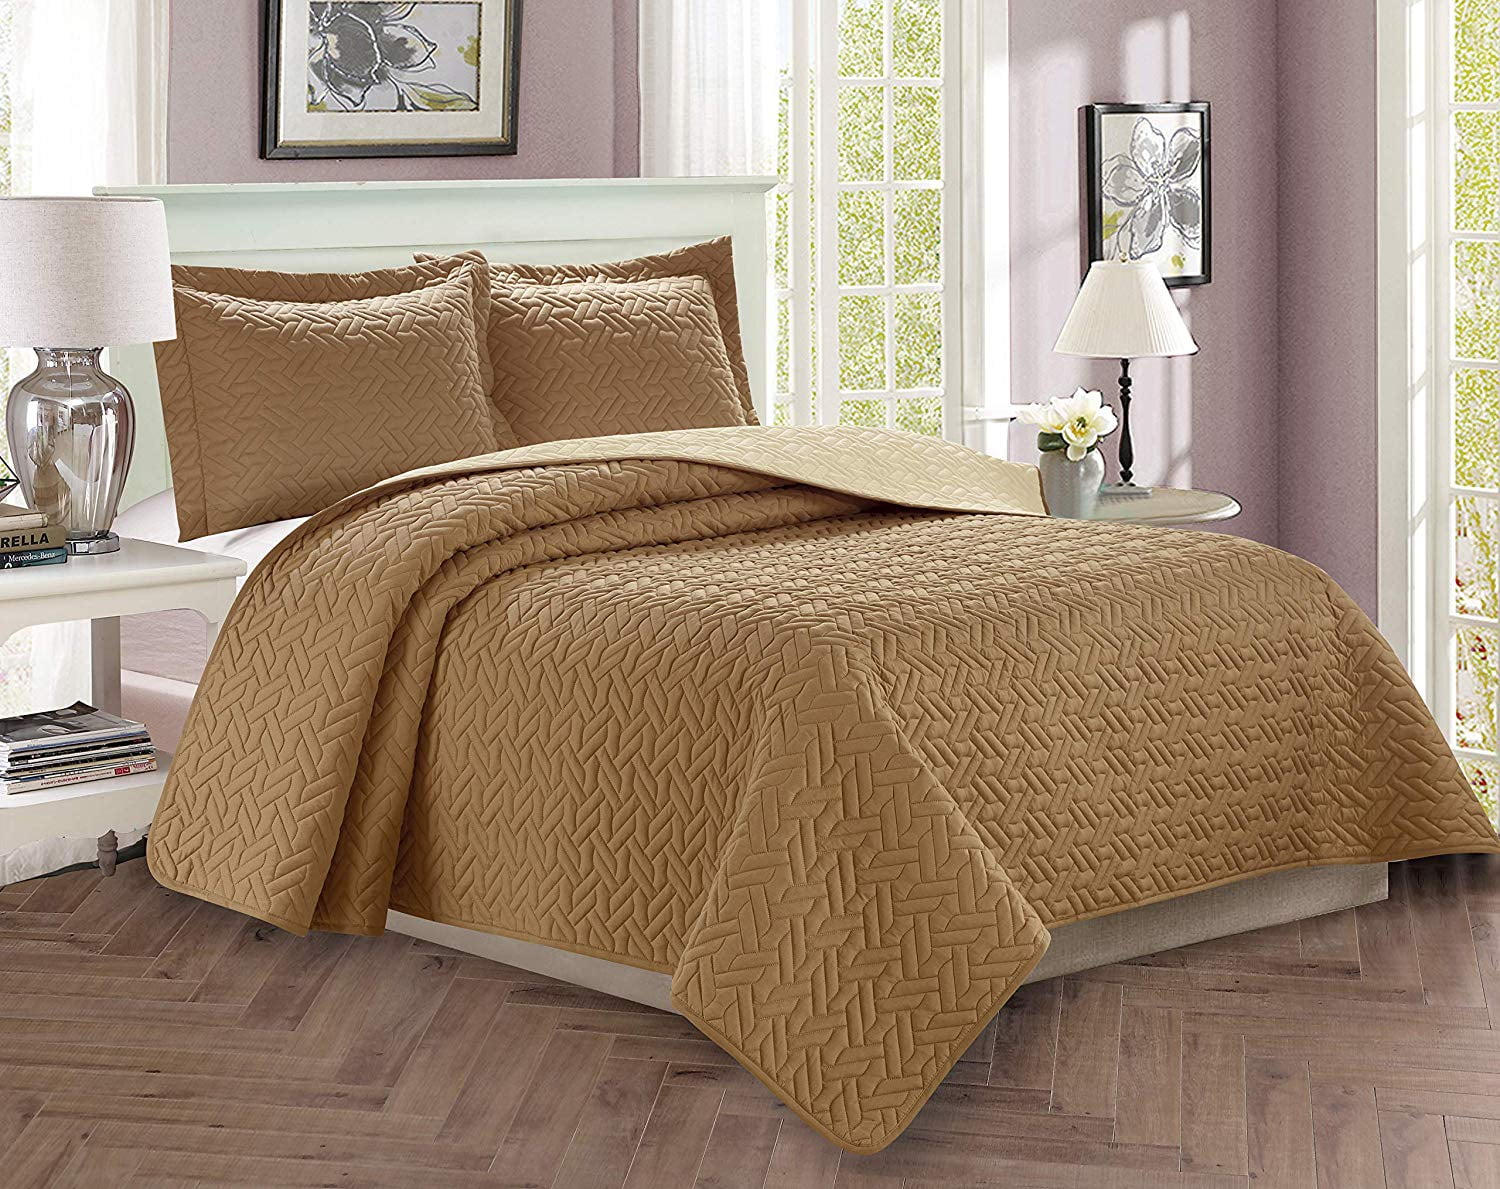 Twin Full Queen King Bed Taupe Beige Pinsonic Quilted 3 pc Comforter Set Bedding